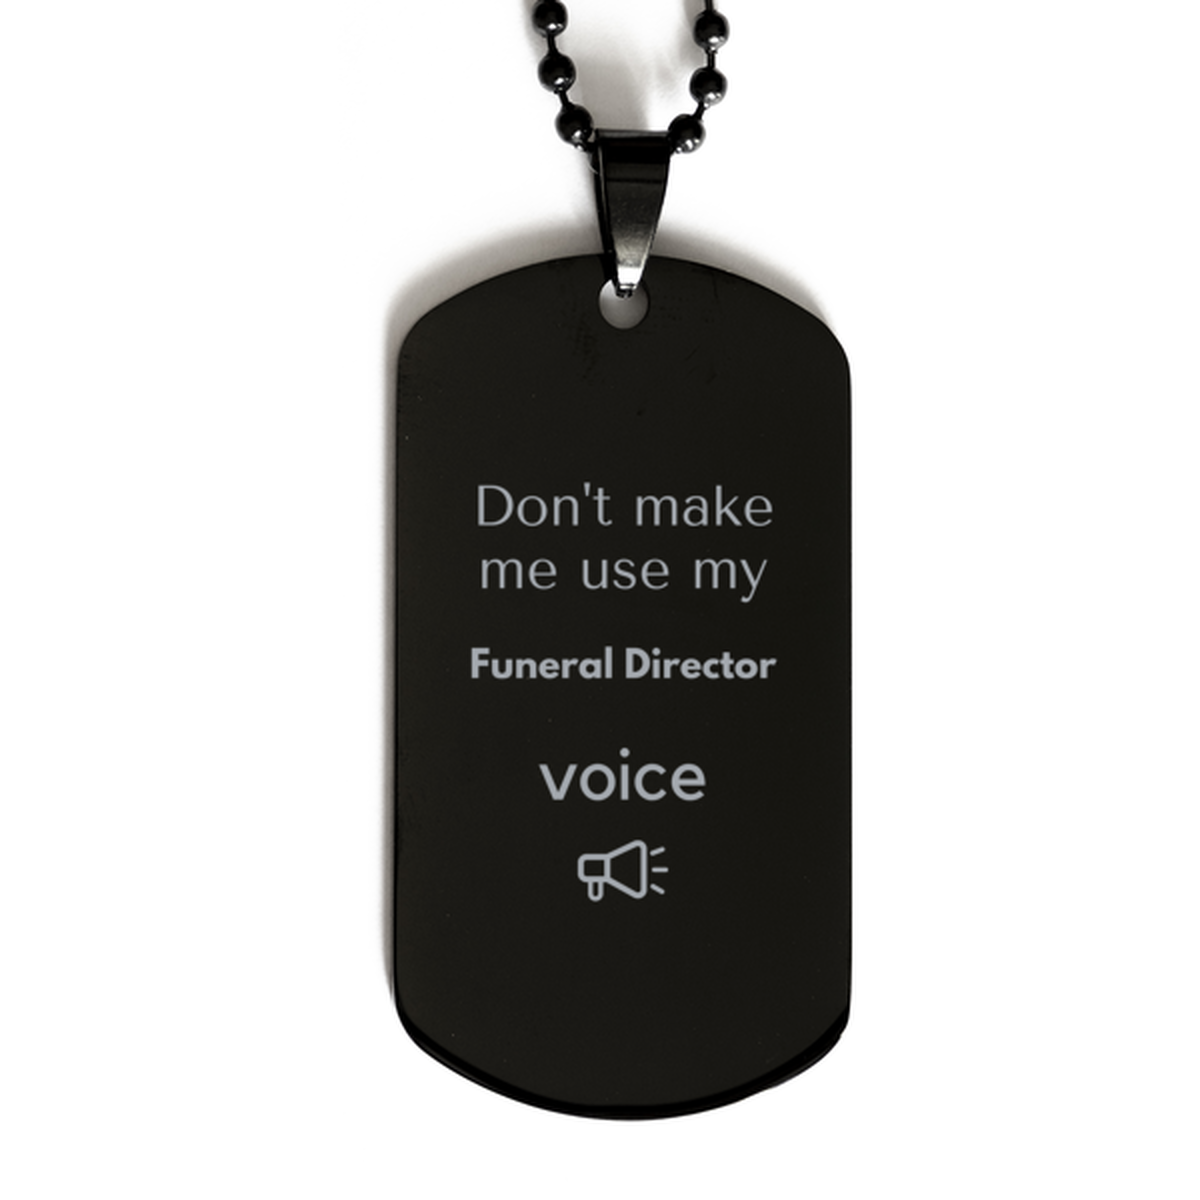 Don't make me use my Funeral Director voice, Sarcasm Funeral Director Gifts, Christmas Funeral Director Black Dog Tag Birthday Unique Gifts For Funeral Director Coworkers, Men, Women, Colleague, Friends